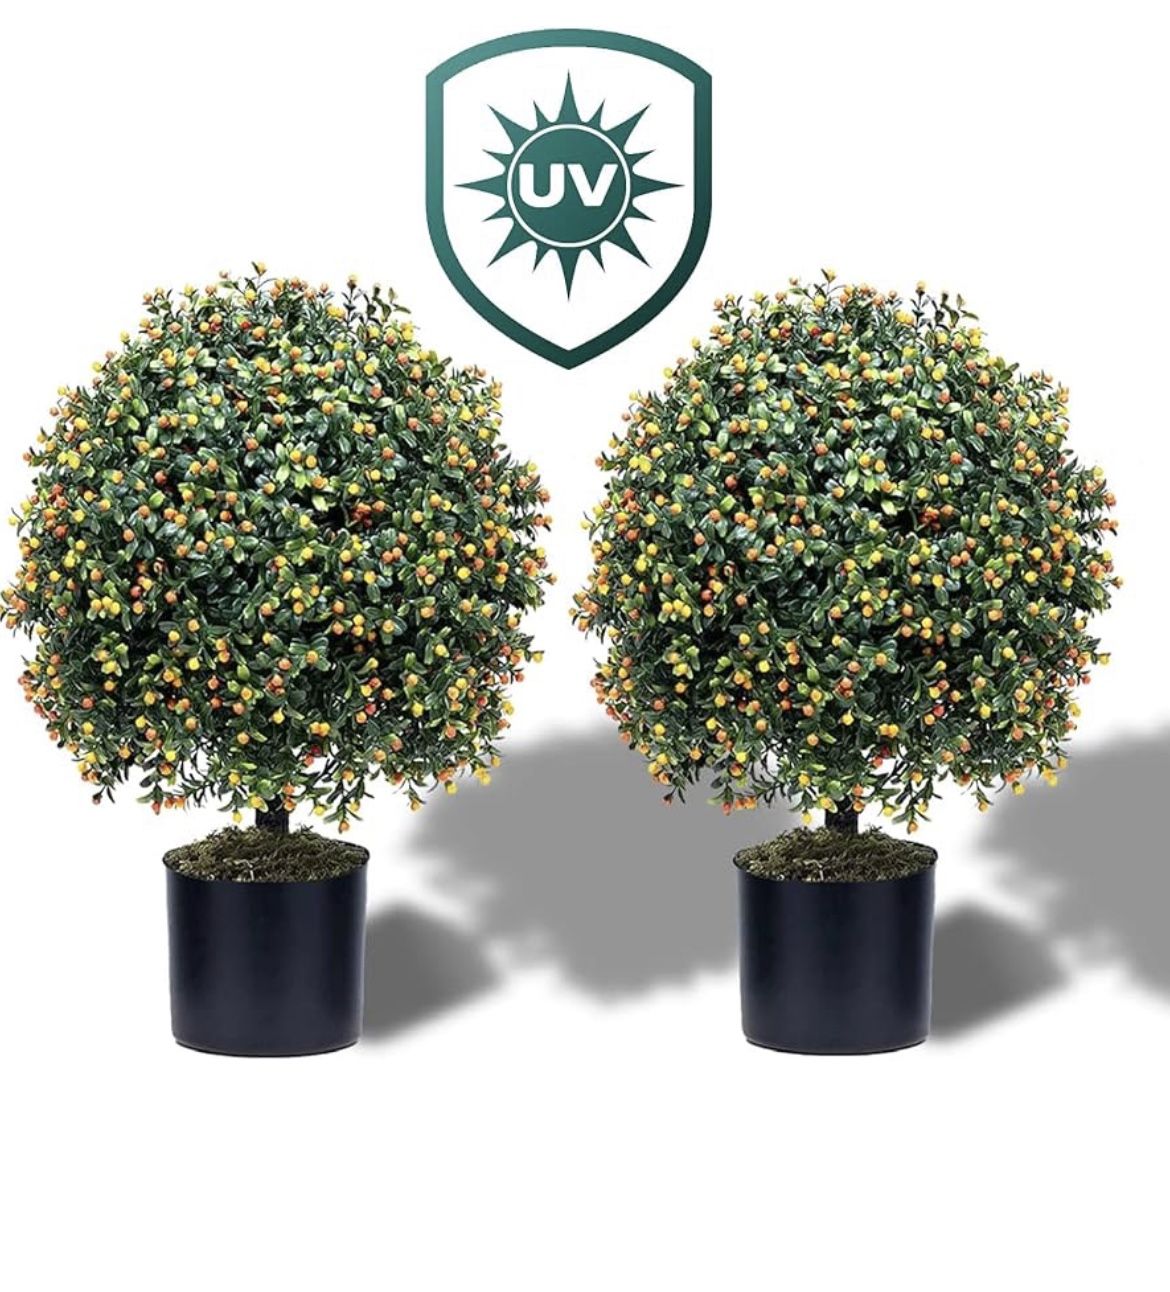 Set of 2-Pre-Potted Artificial Boxwood, 24'' Anti-UV Engineering Grade Material, Decorative Topiary Ball for Indoor Outdoor (Green with Orange Fruits)